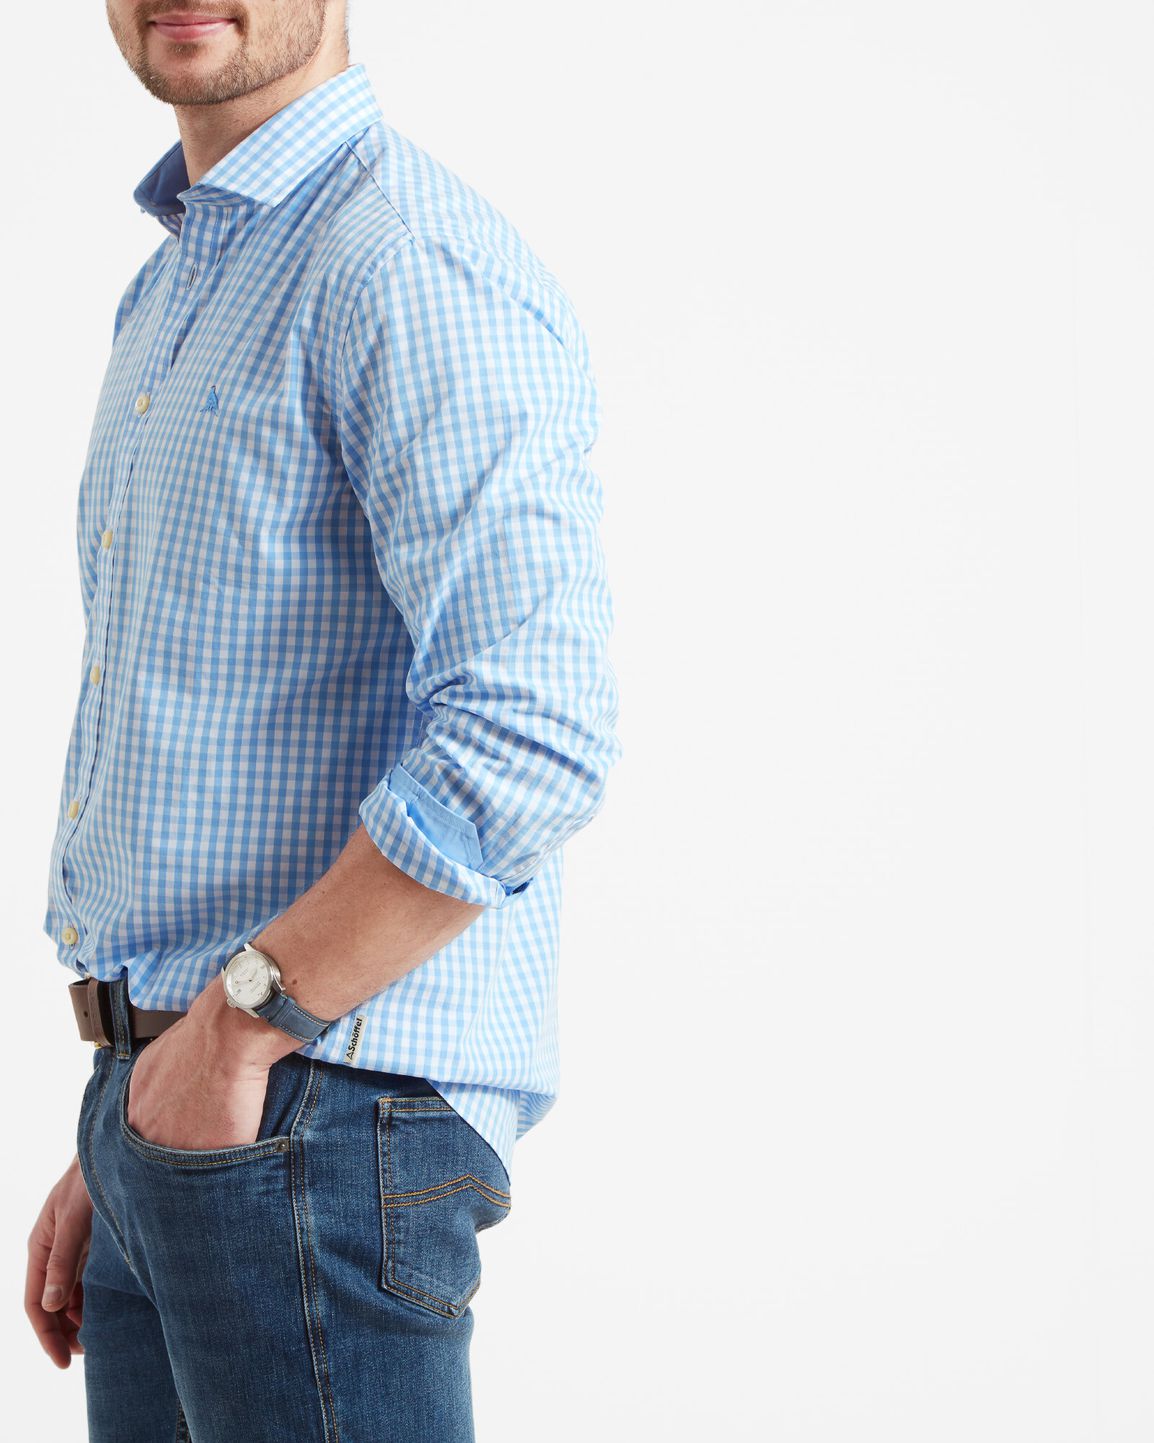 Thorpeness Tailored Shirt Blue Check